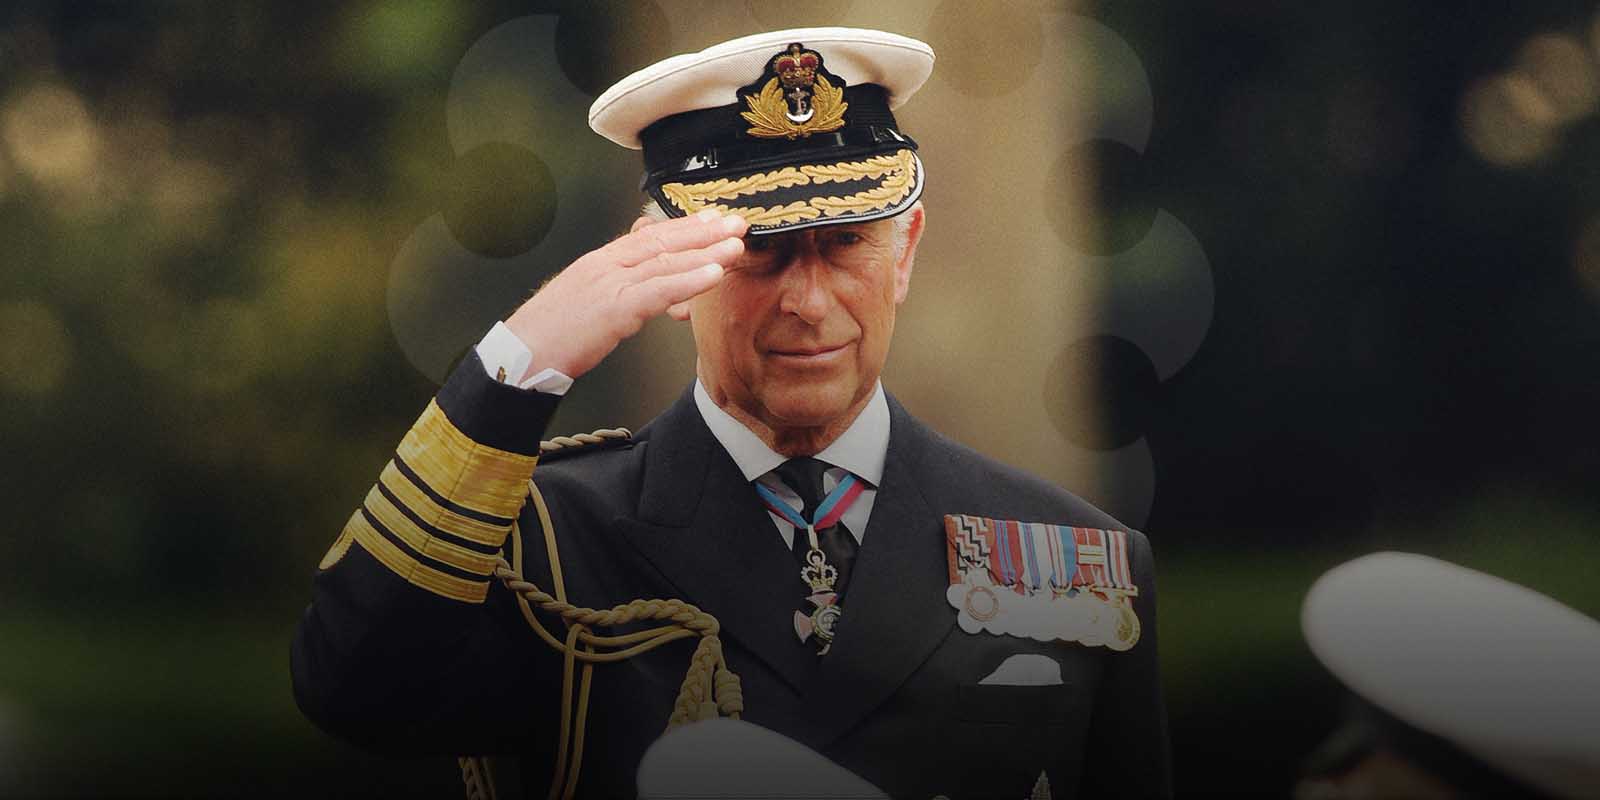 HRH The Prince Charles, Prince of Wales